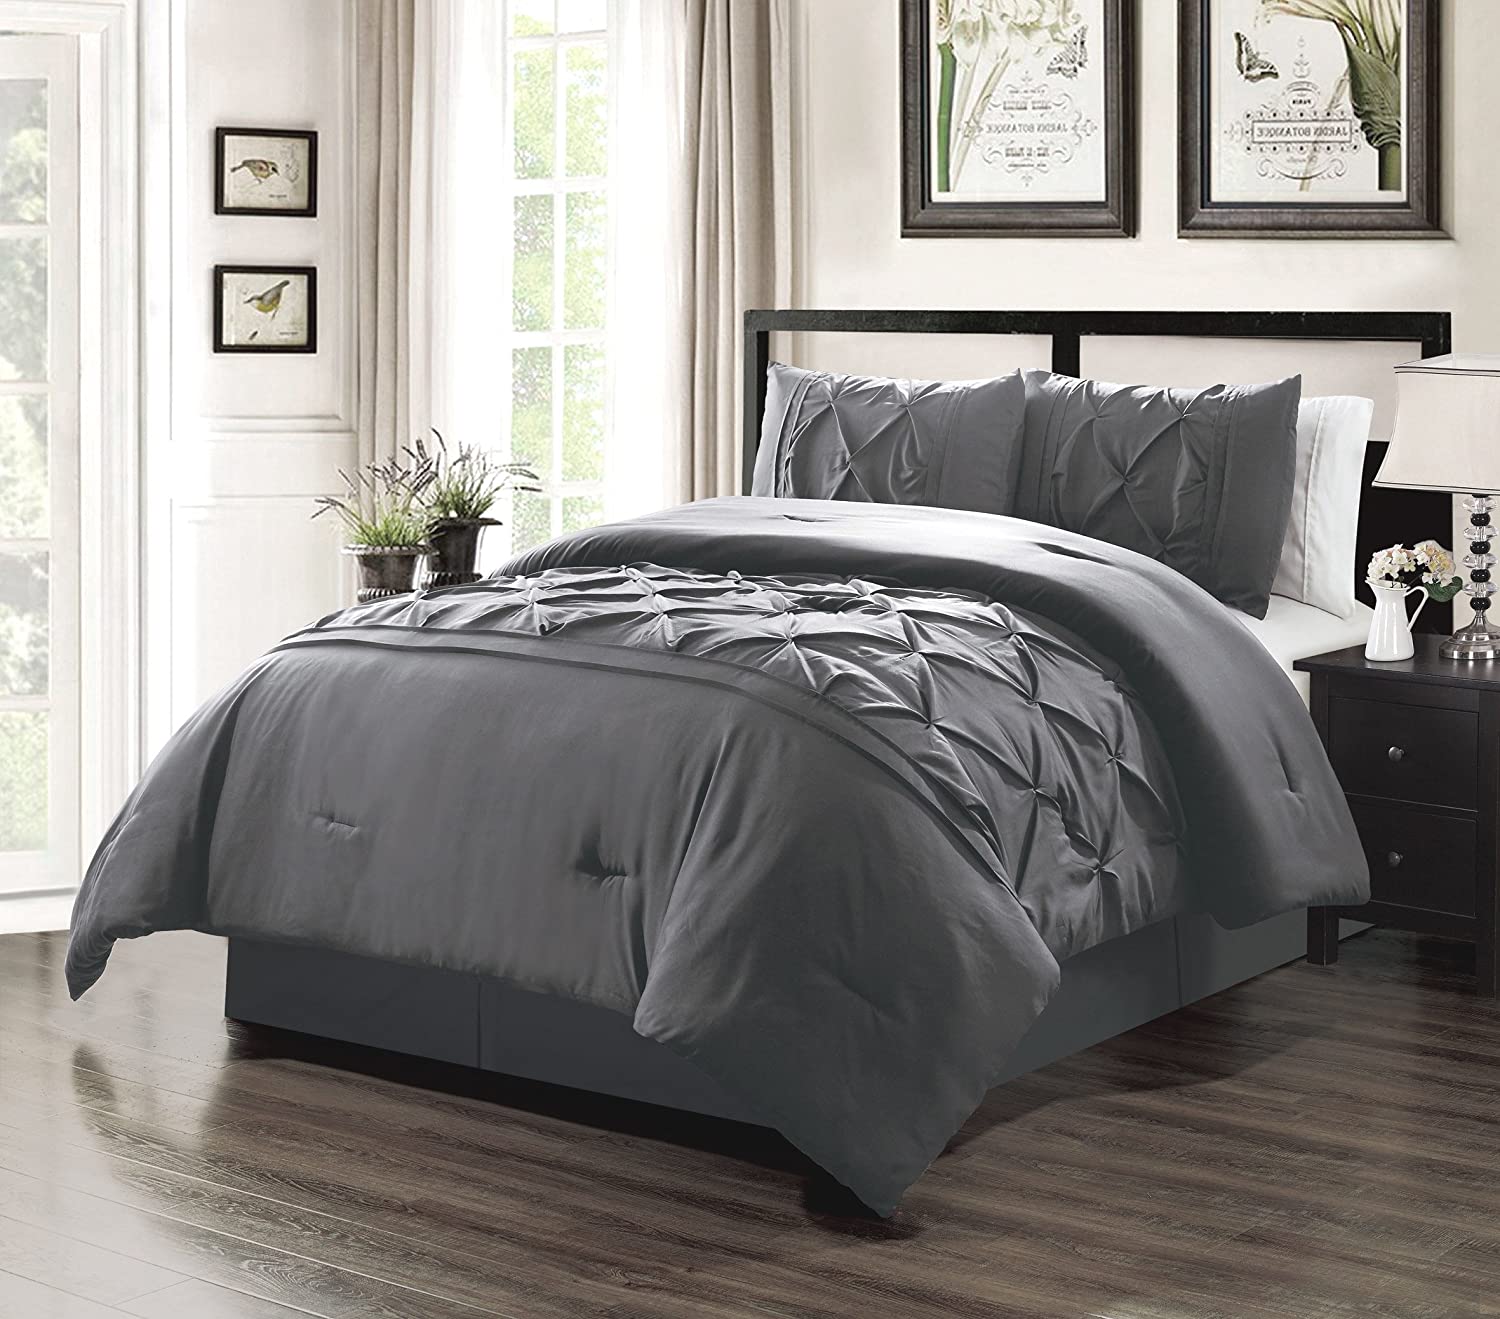 Details about   GrandLinen 3 Piece King Size Solid Light Grey Double-Needle Stitch Puckered Pinc 